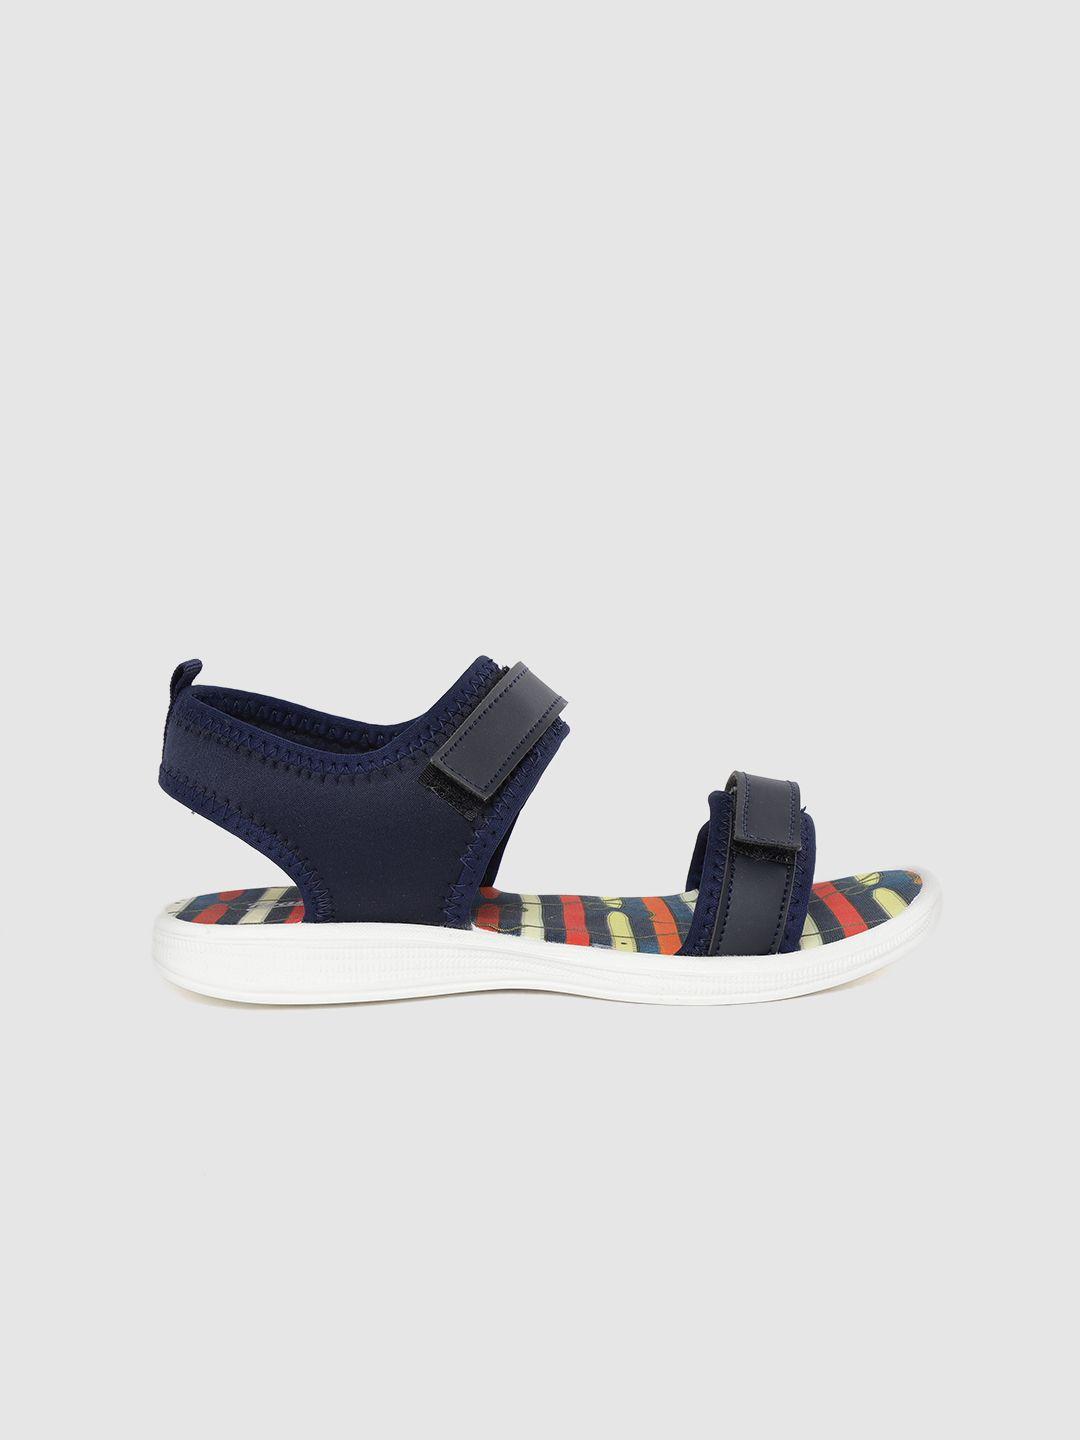 the roadster lifestyle co women navy blue & black sports sandals